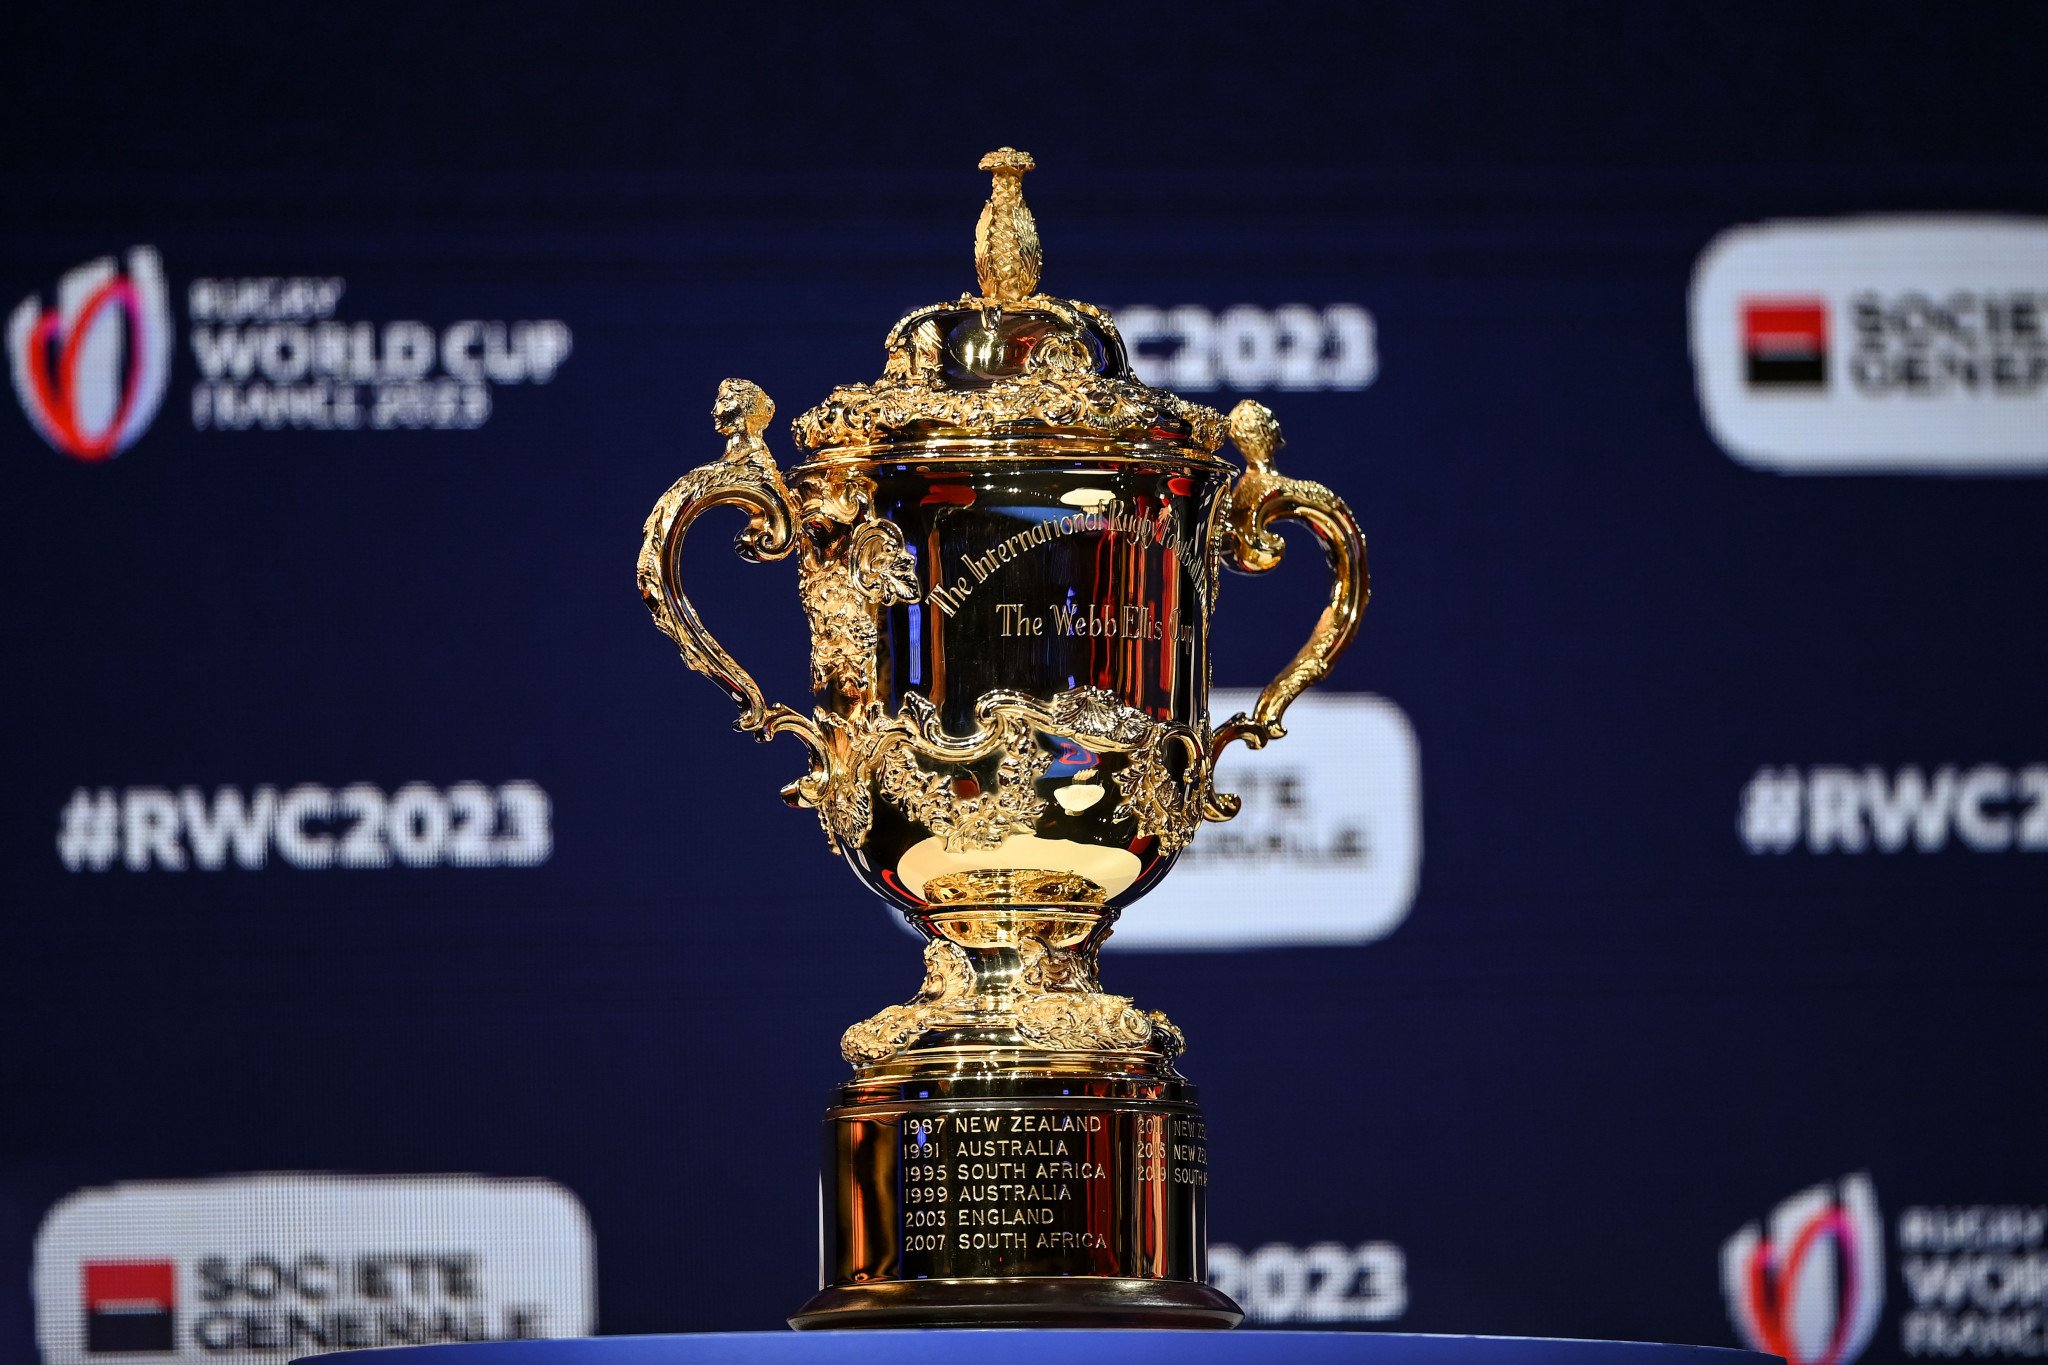 Organisers place 000 tickets on sale for 2023 Rugby World Cup